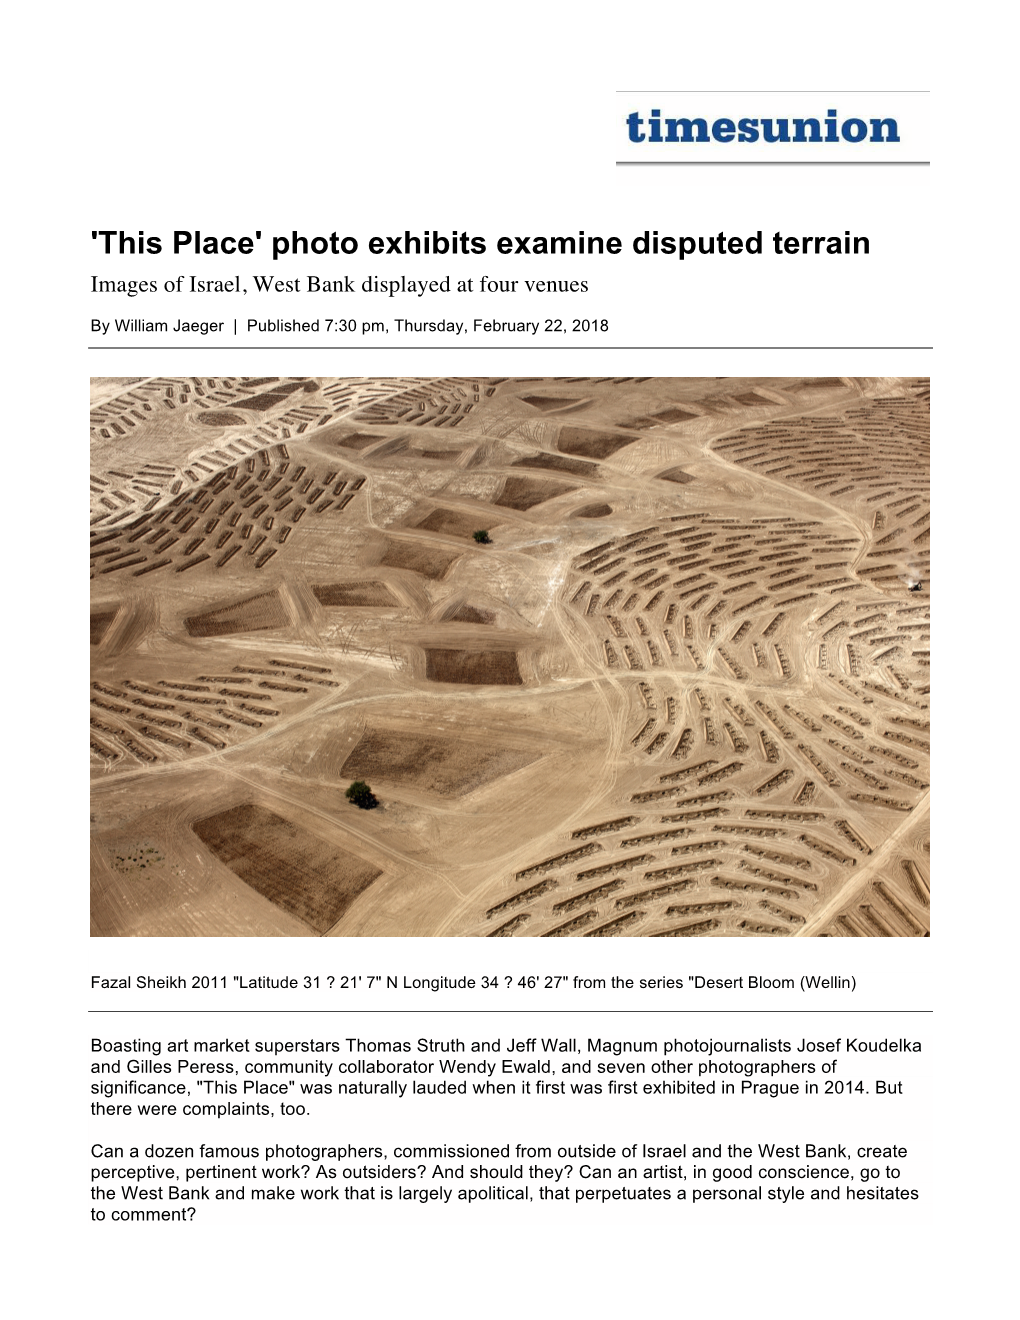 'This Place' Photo Exhibits Examine Disputed Terrain Images of Israel, West Bank Displayed at Four Venues